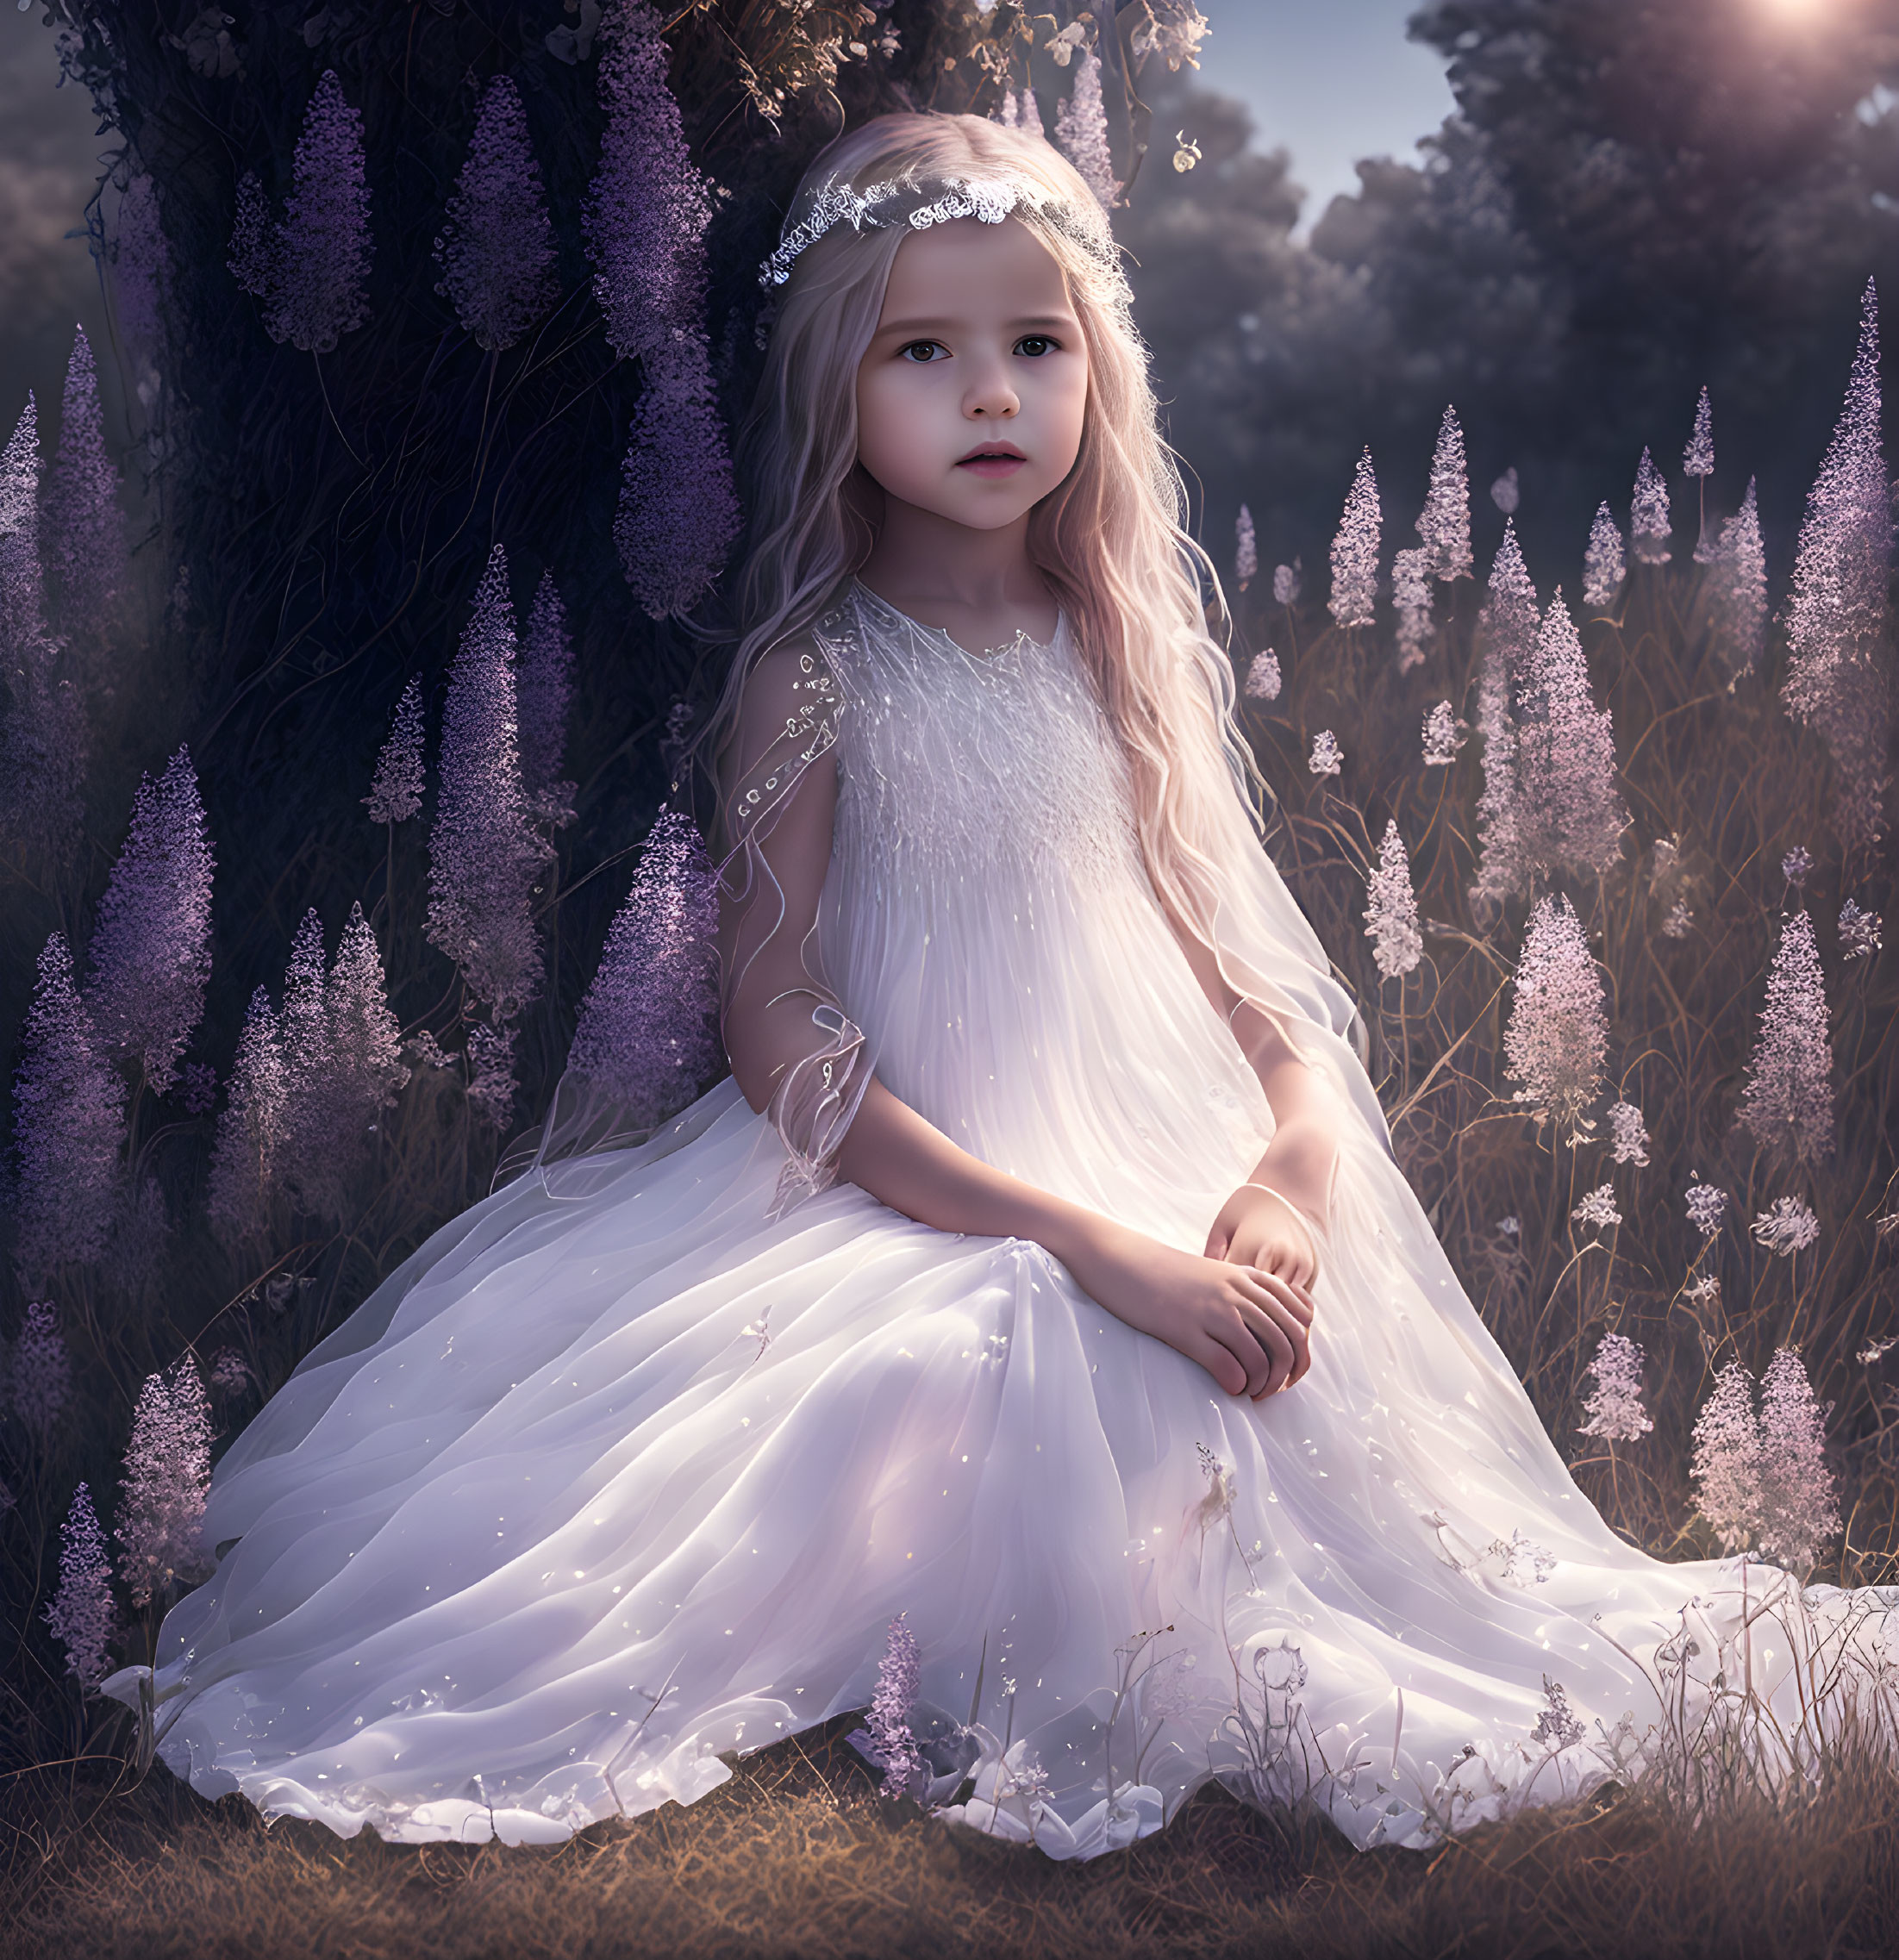 Enchanted Garden: Innocence and Blooms